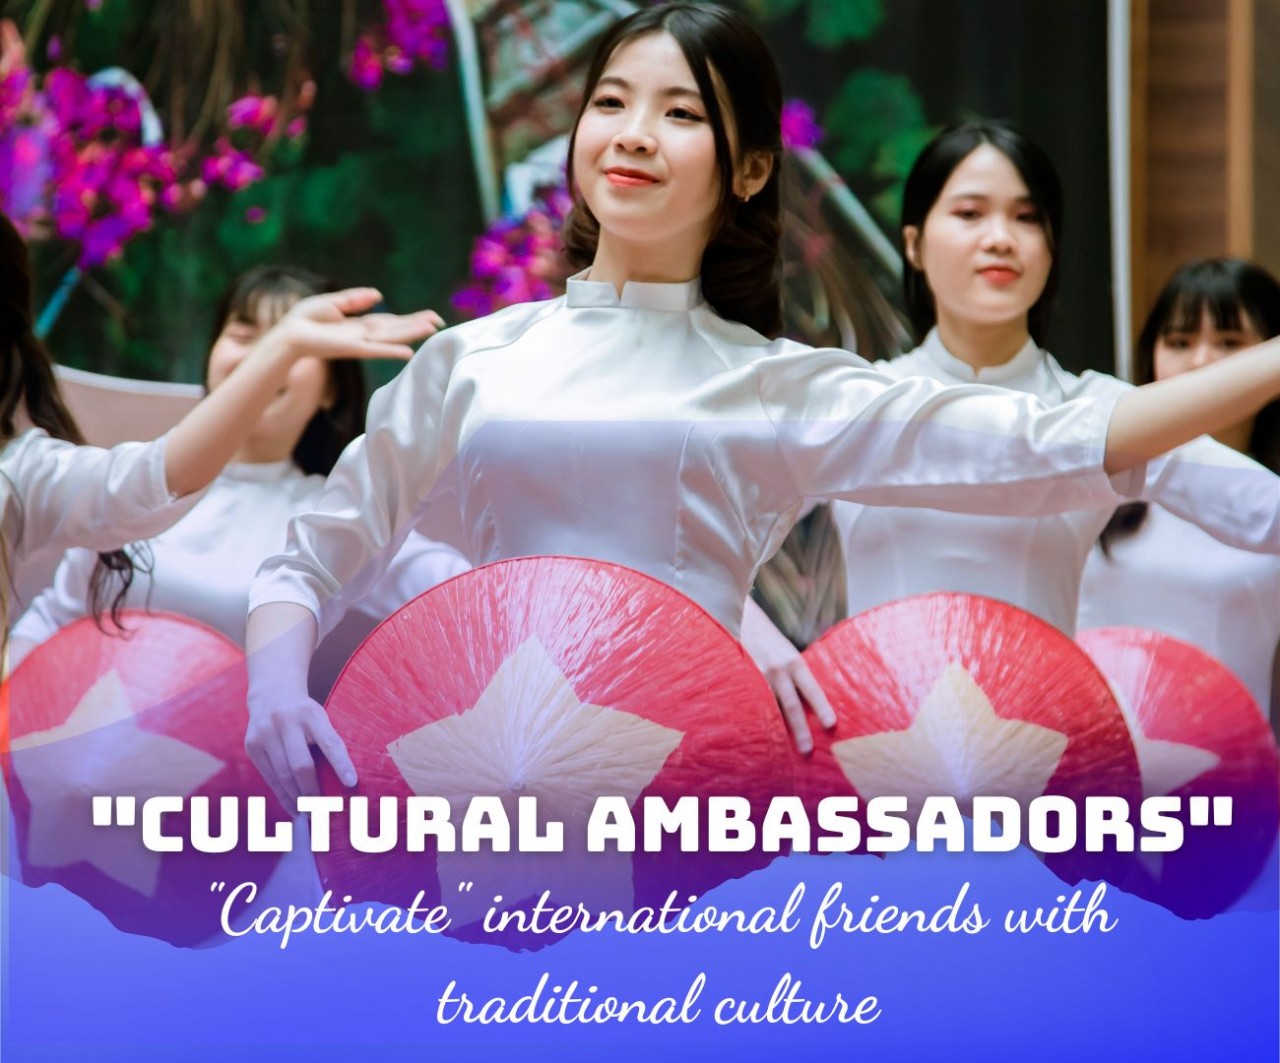 Cultural Ambassadors: Captivating International Friends with Vietnamese Traditions